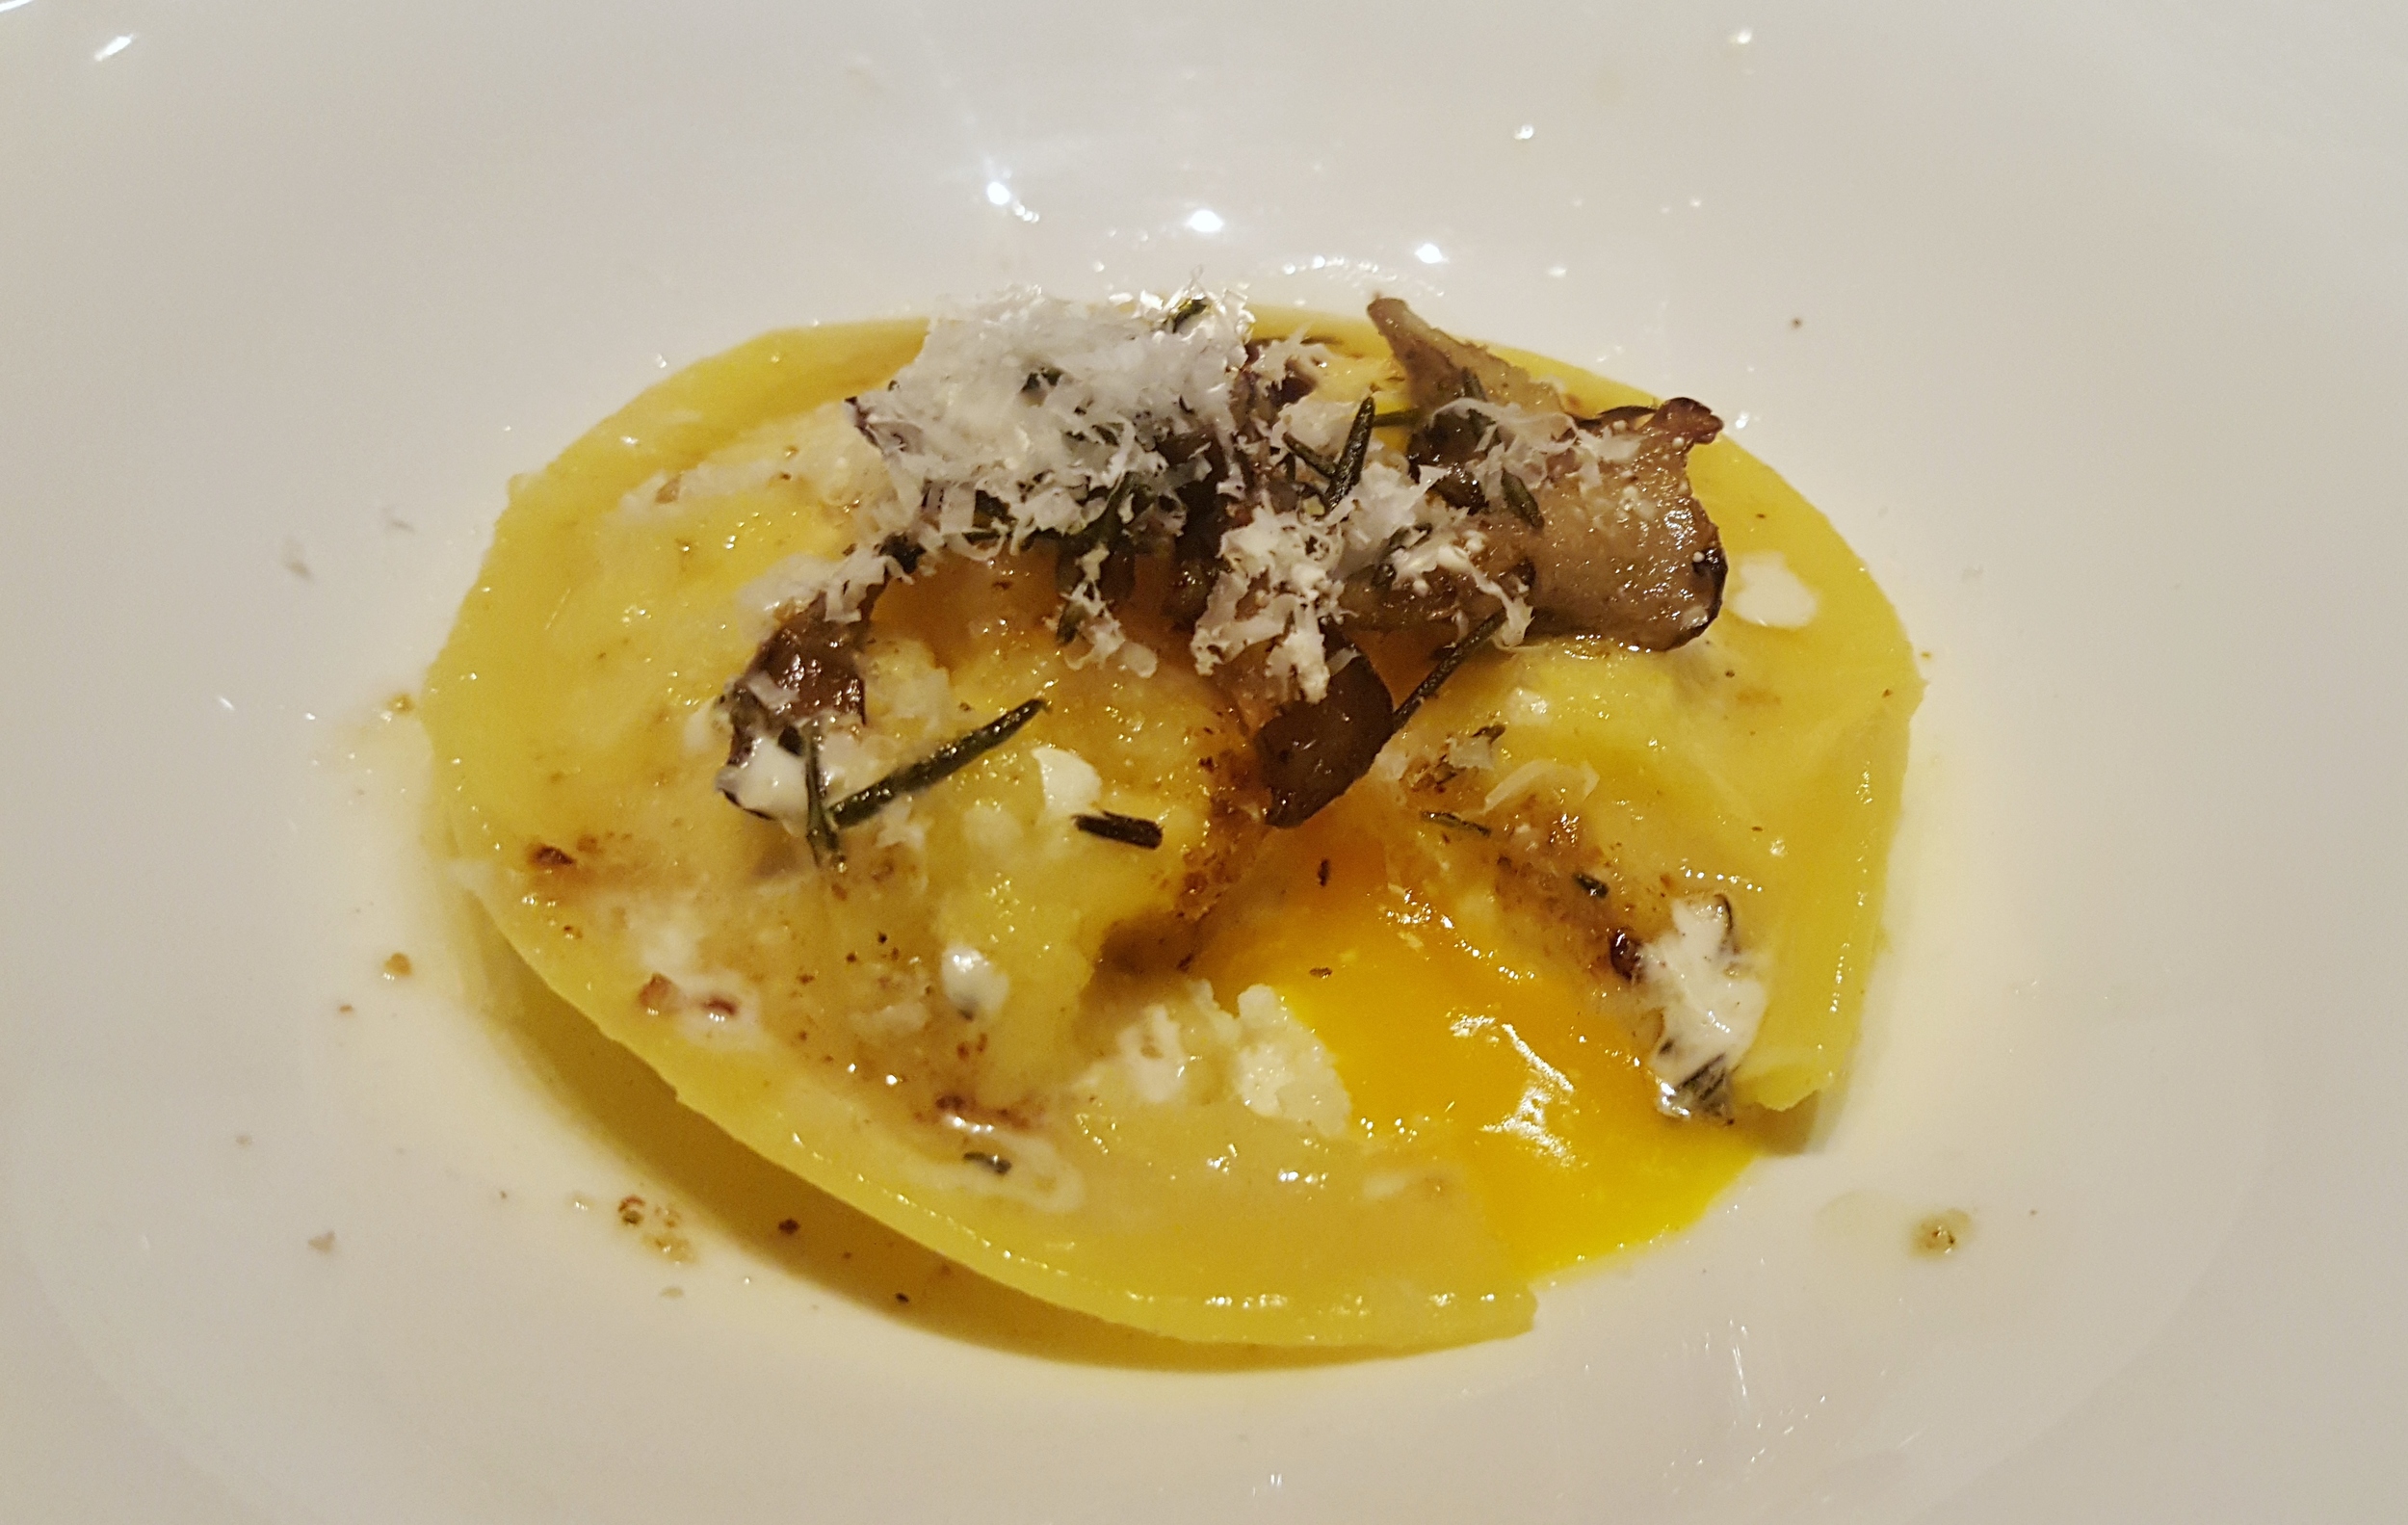 Egg raviolo with ricotta, maitake mushrooms, parmesan, and brown butter